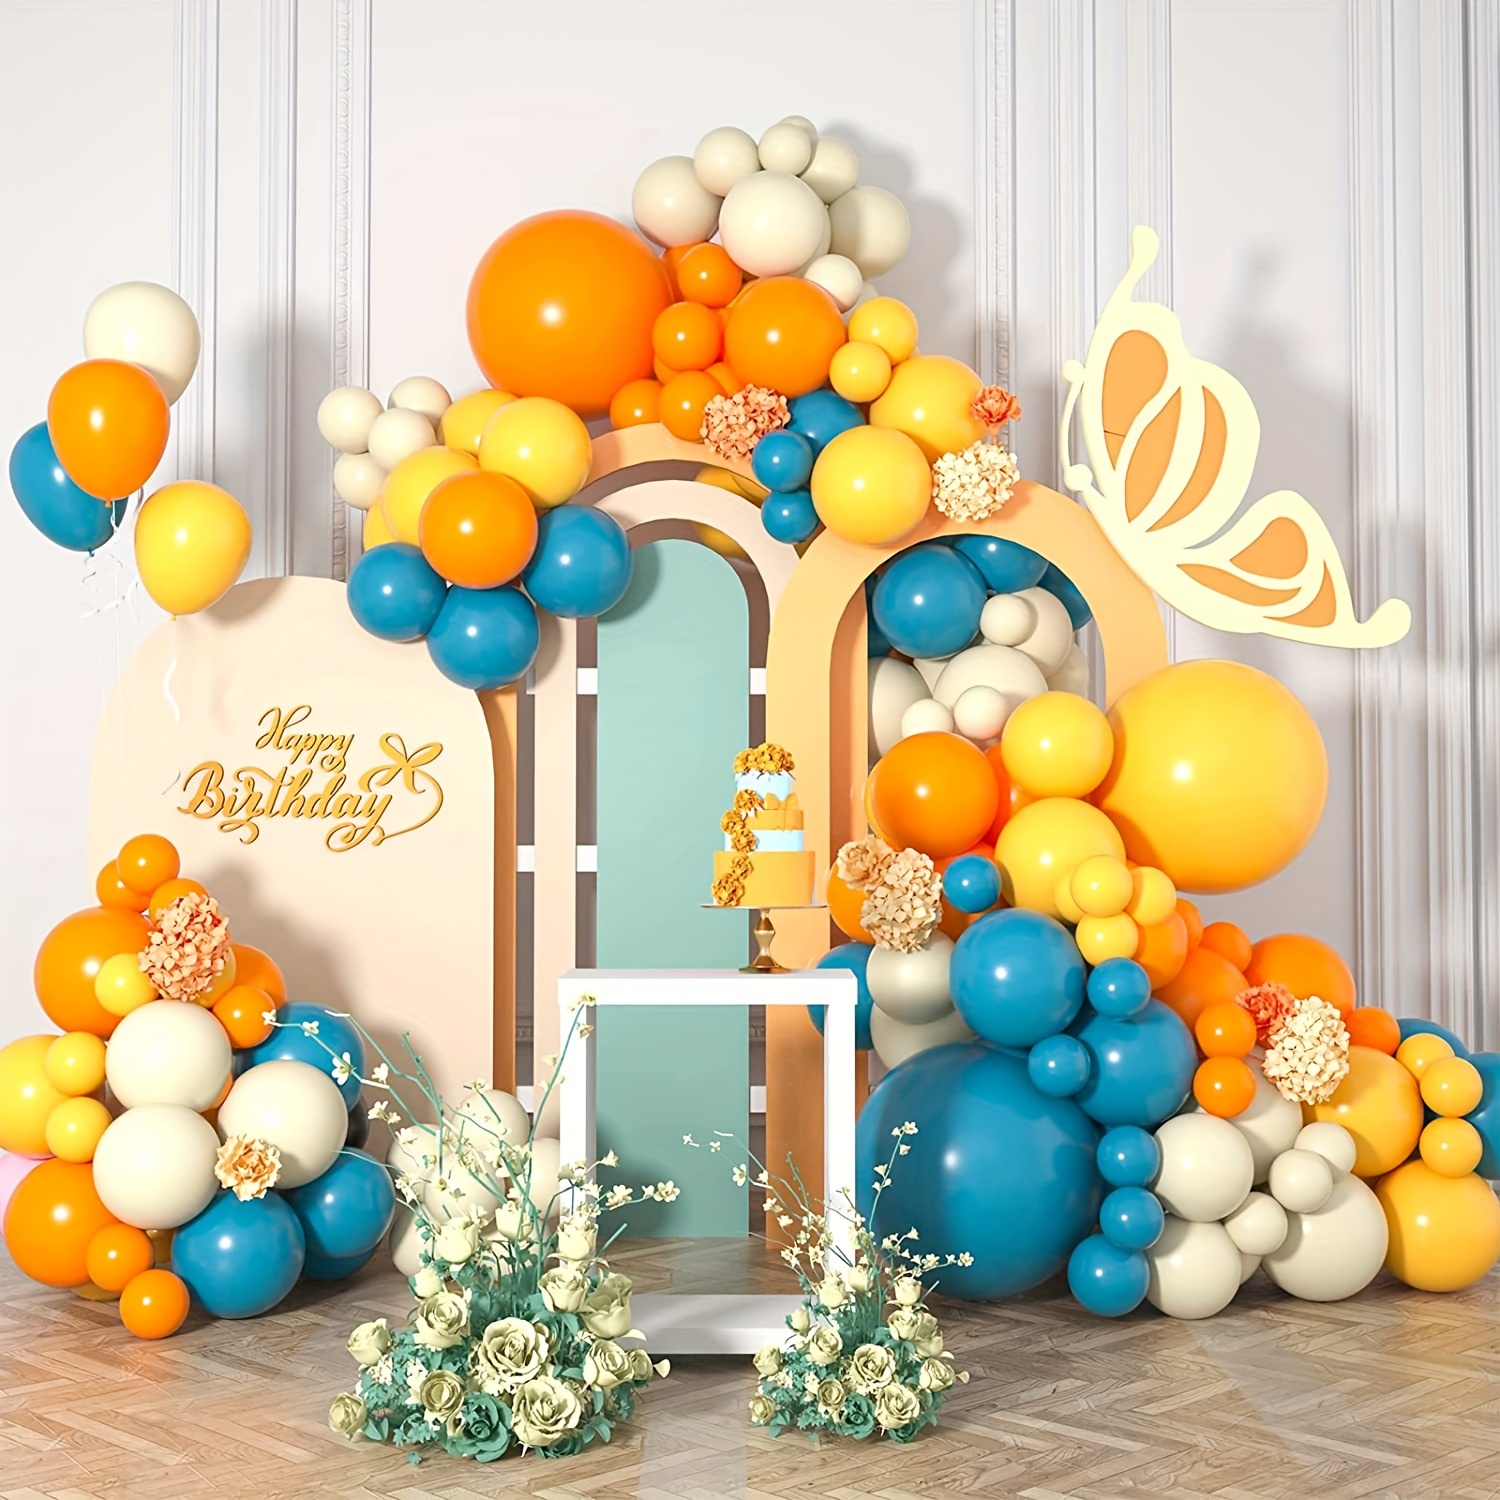 

126pcs, Vintage Blue Orange Yellow Sand White Latex Balloons For Birthday Party Wedding Graduation Bridal Shower Home Decor Balloon Arch Room Background Decor Party Decoration Supplies